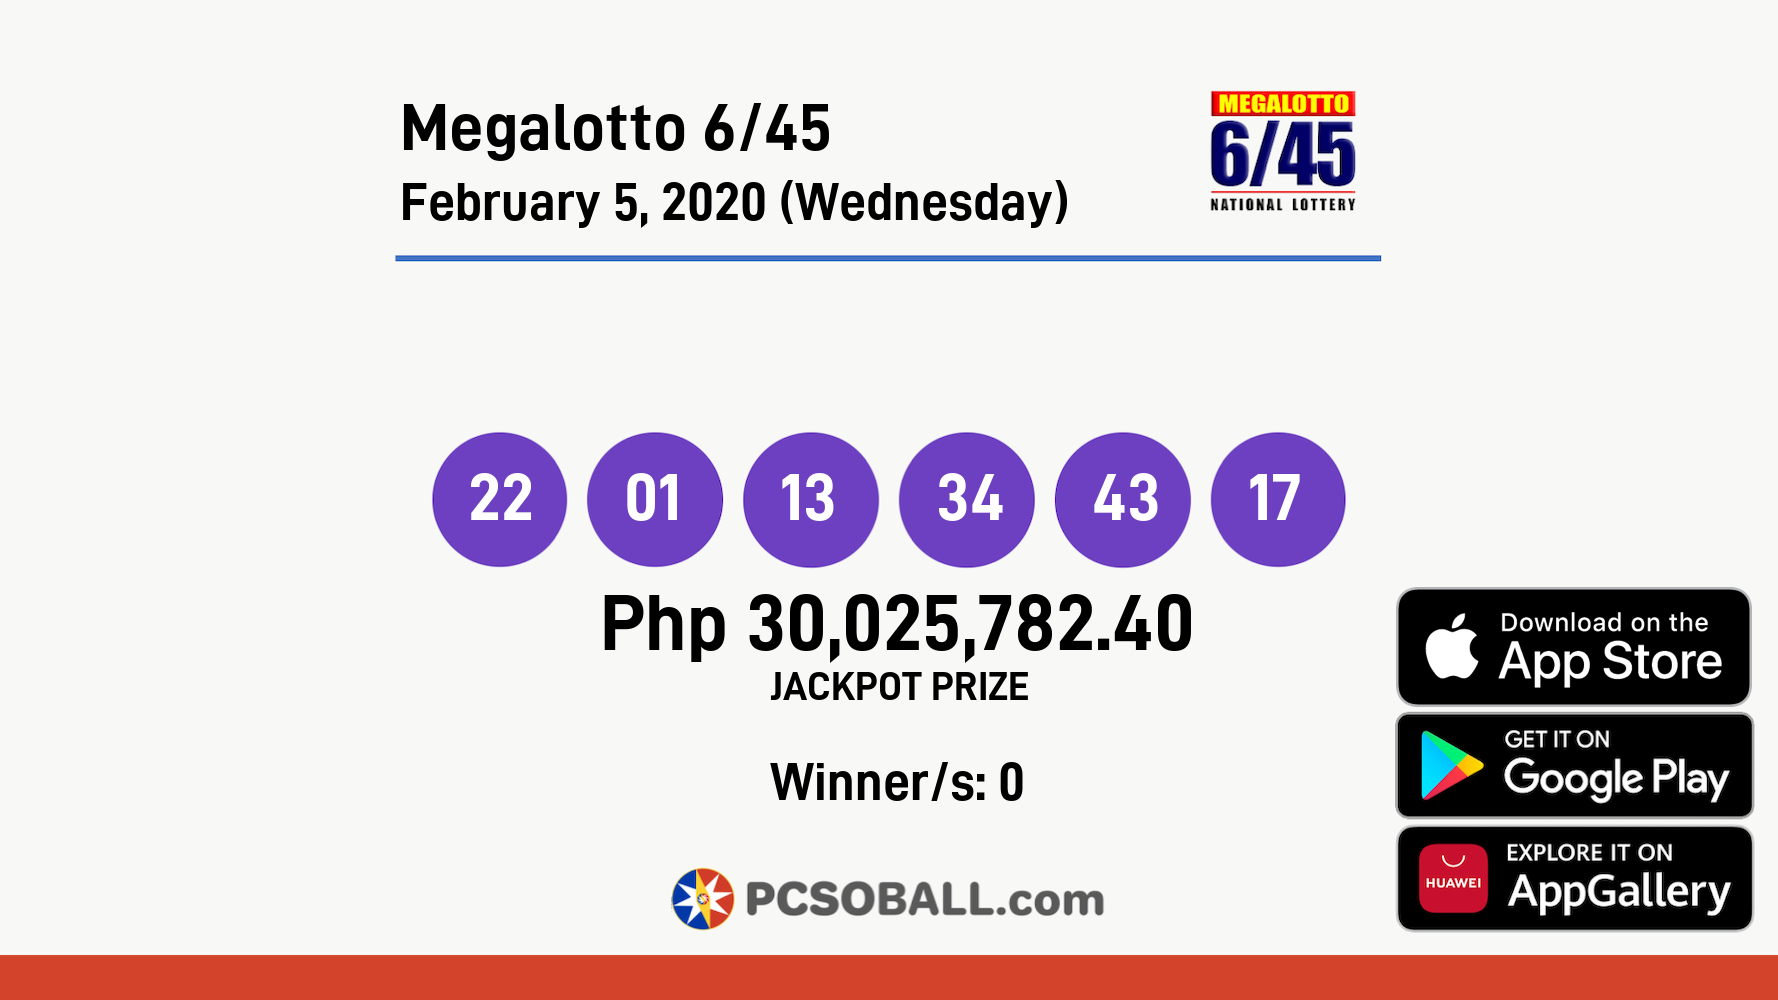 Megalotto 6/45 February 5, 2020 (Wednesday) Result